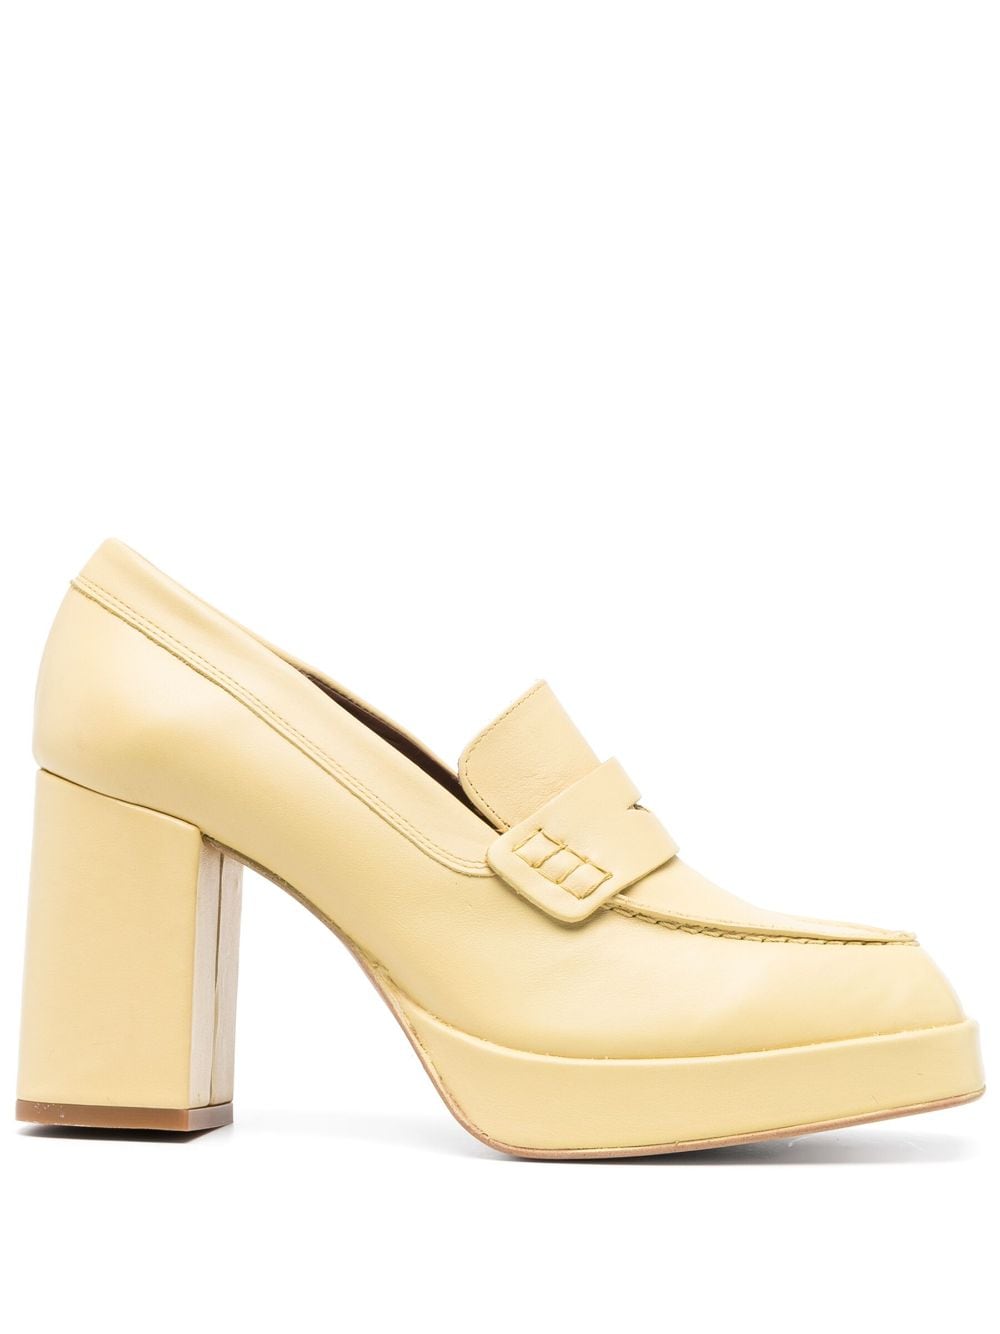 ALOHAS Busy 90mm leather pumps - Yellow von ALOHAS